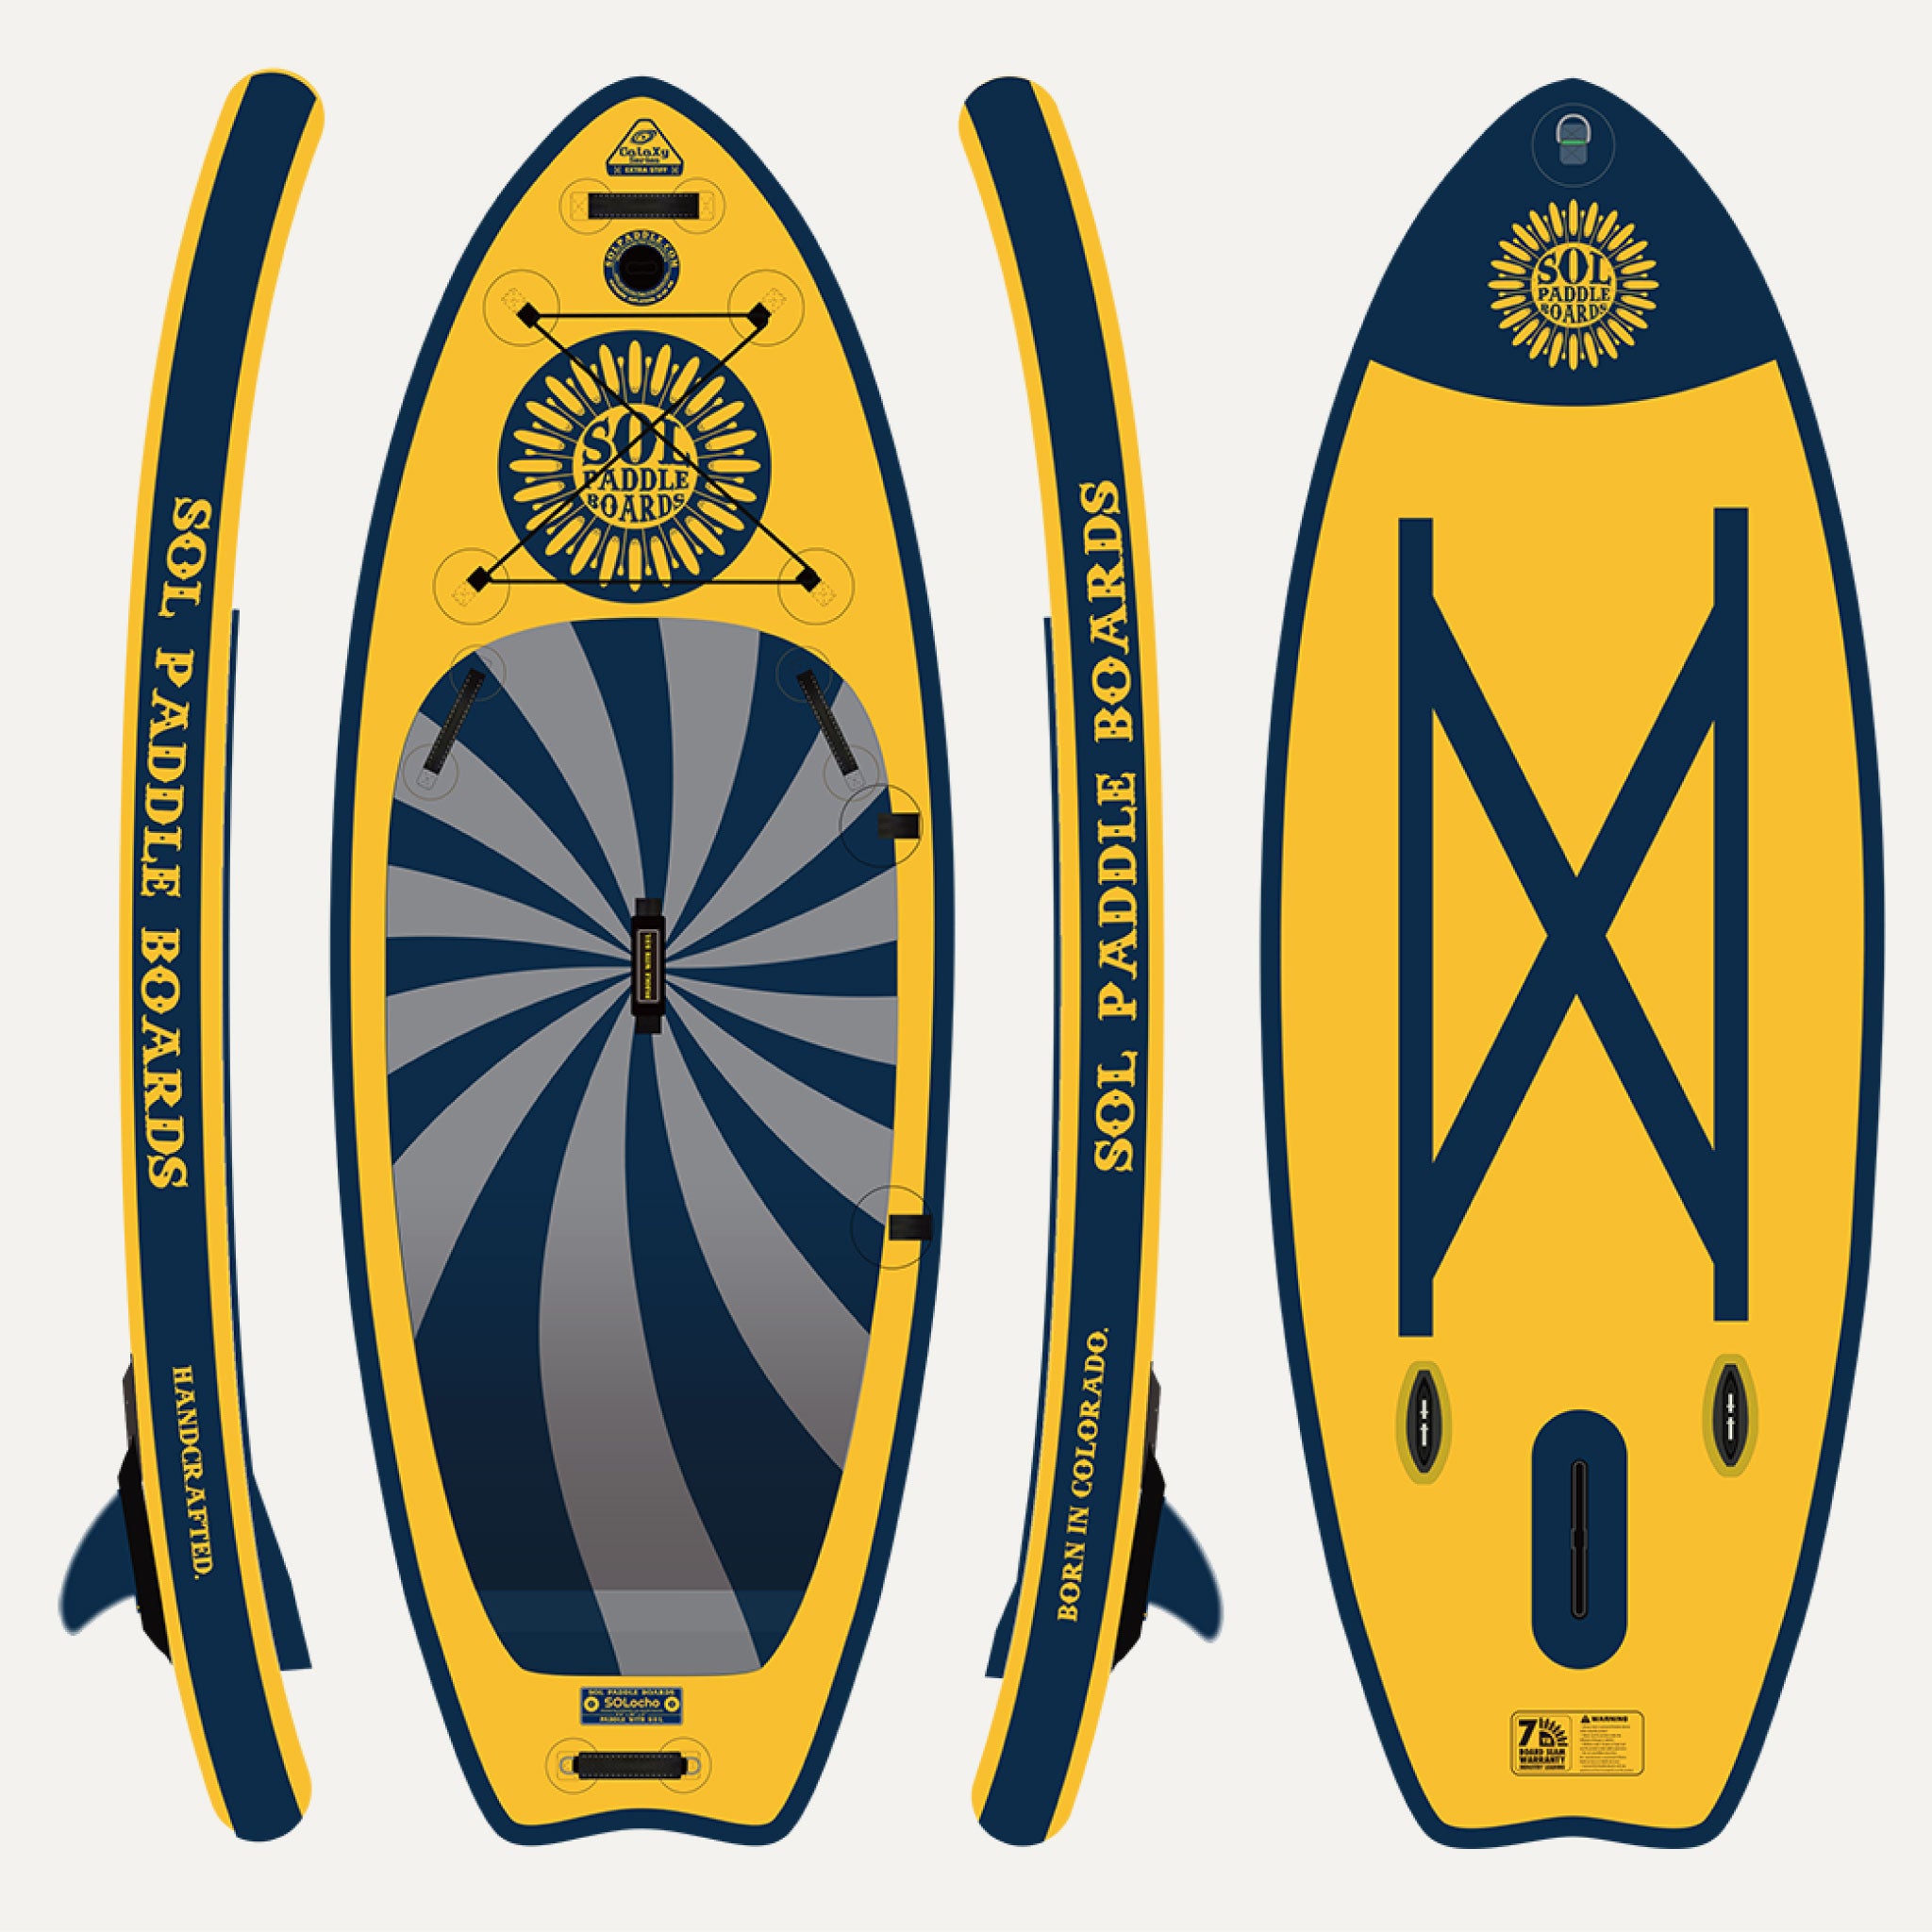 iSUP Infinity Inflatable Paddleboards Wide Aquatic Air SUP Boards